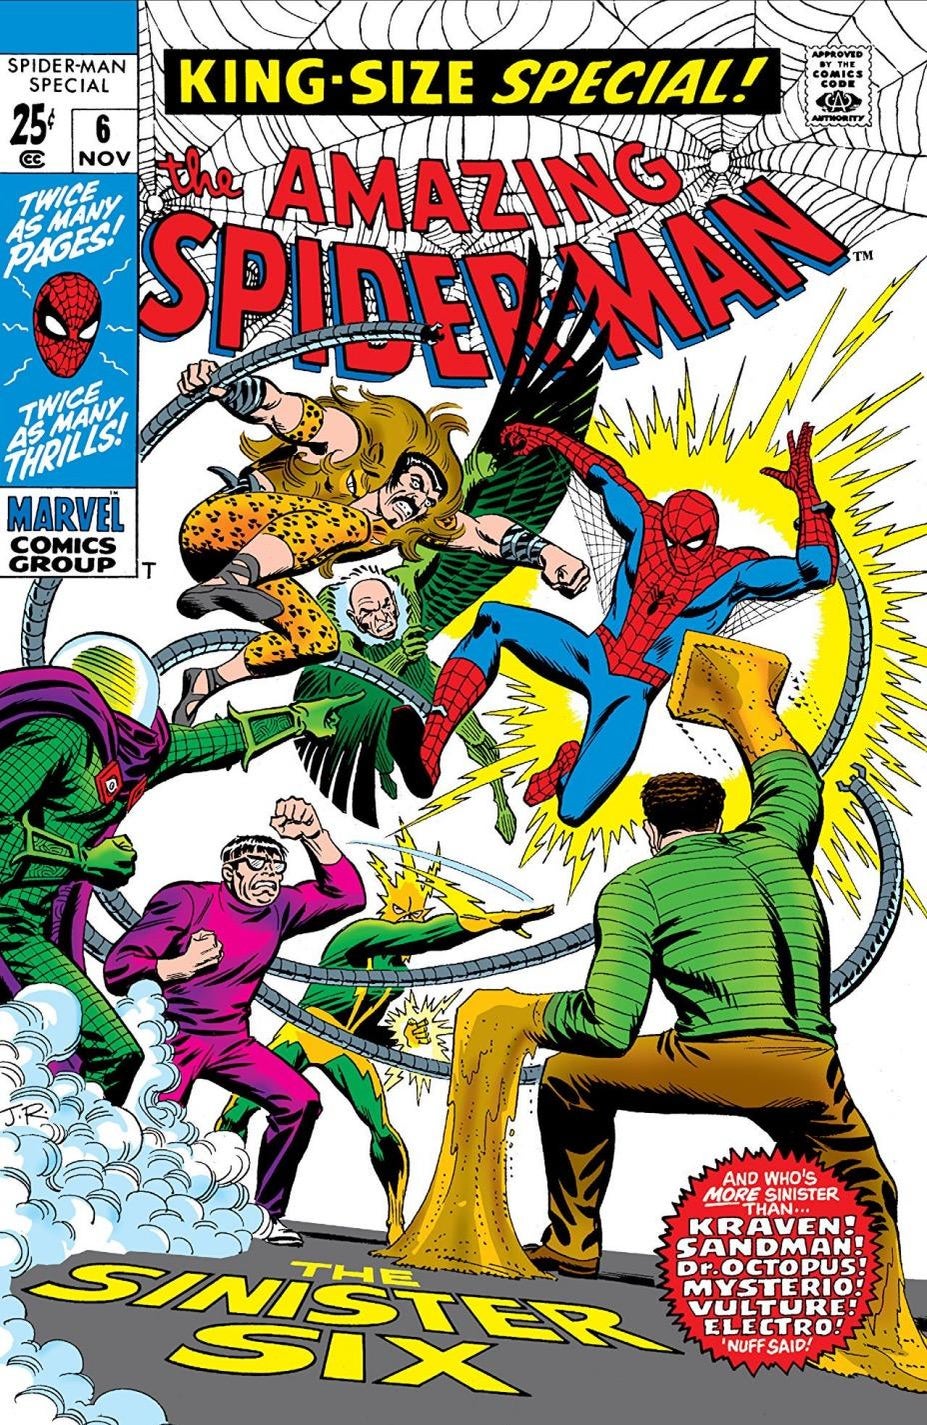 Back Issues: Spider-Man's Deadliest Foes Form the Sinister Six